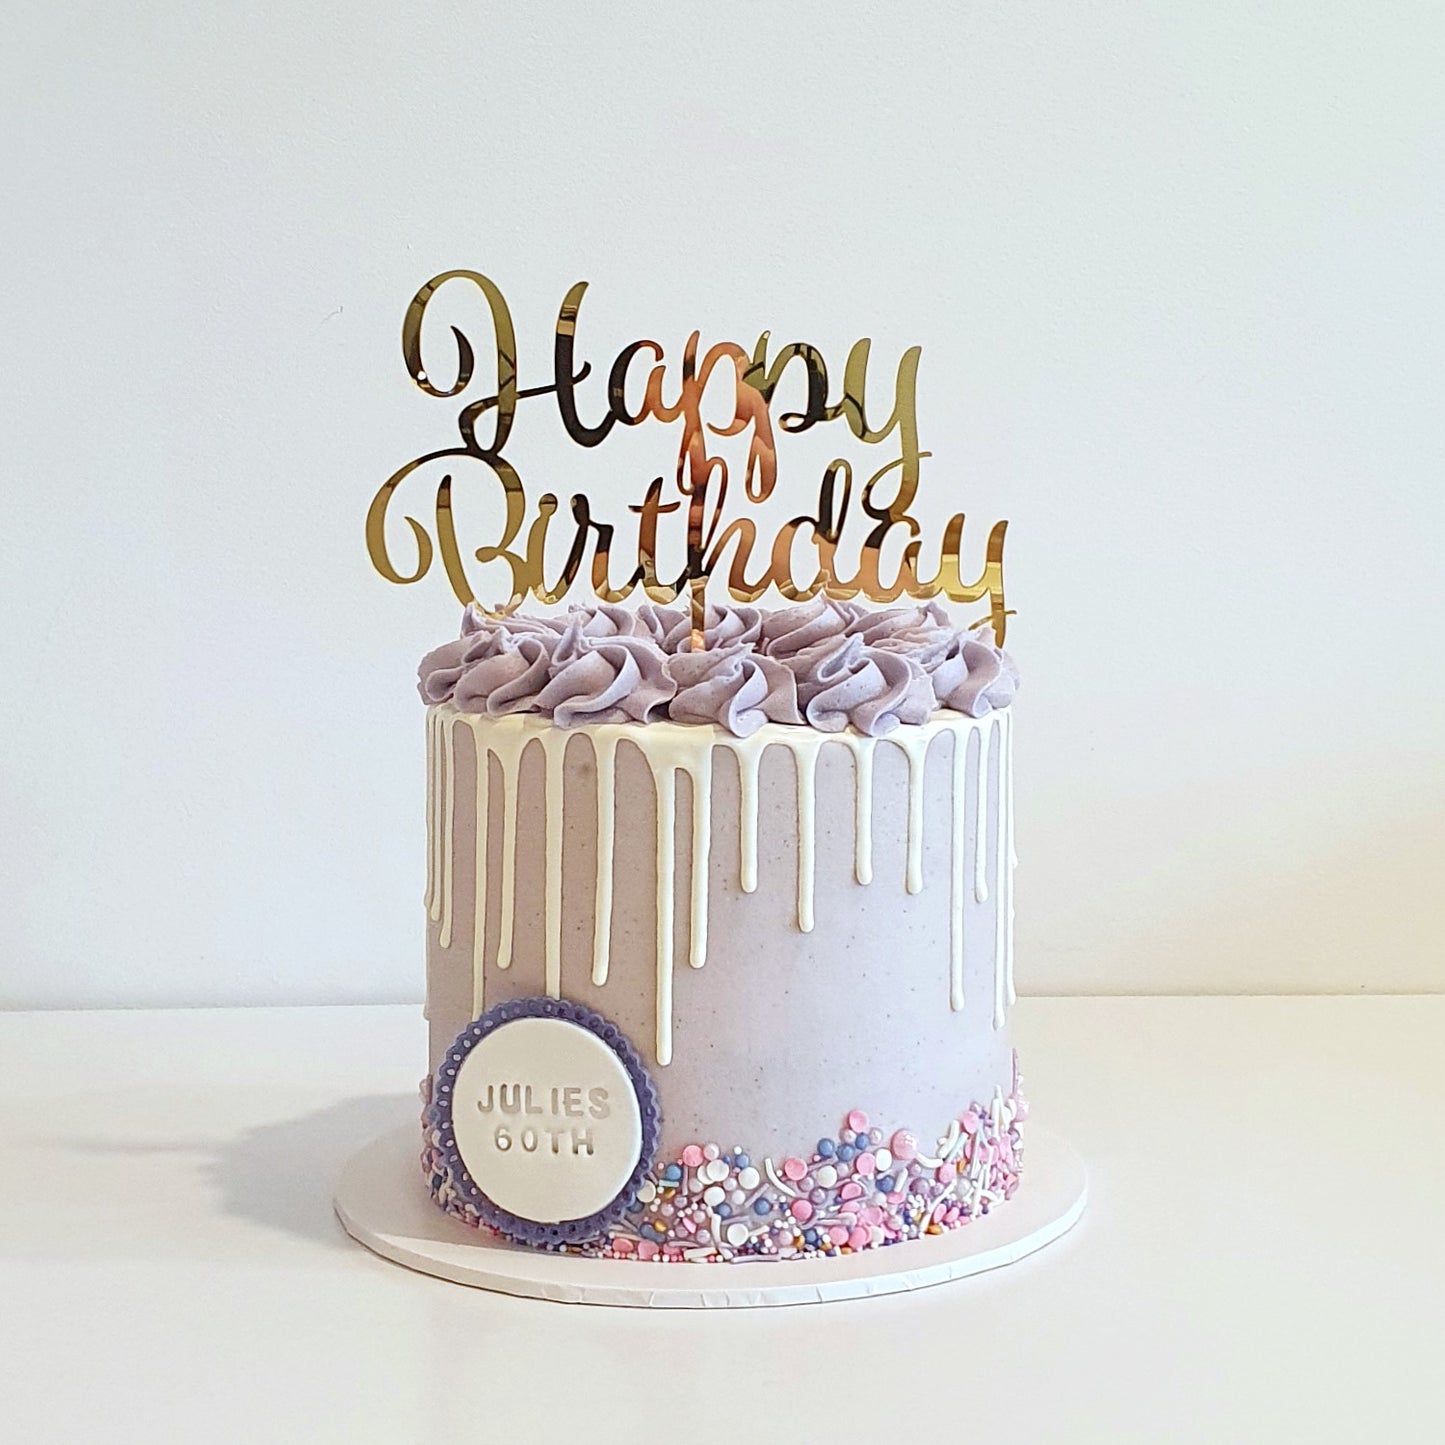 Add a personalised disc to your cake